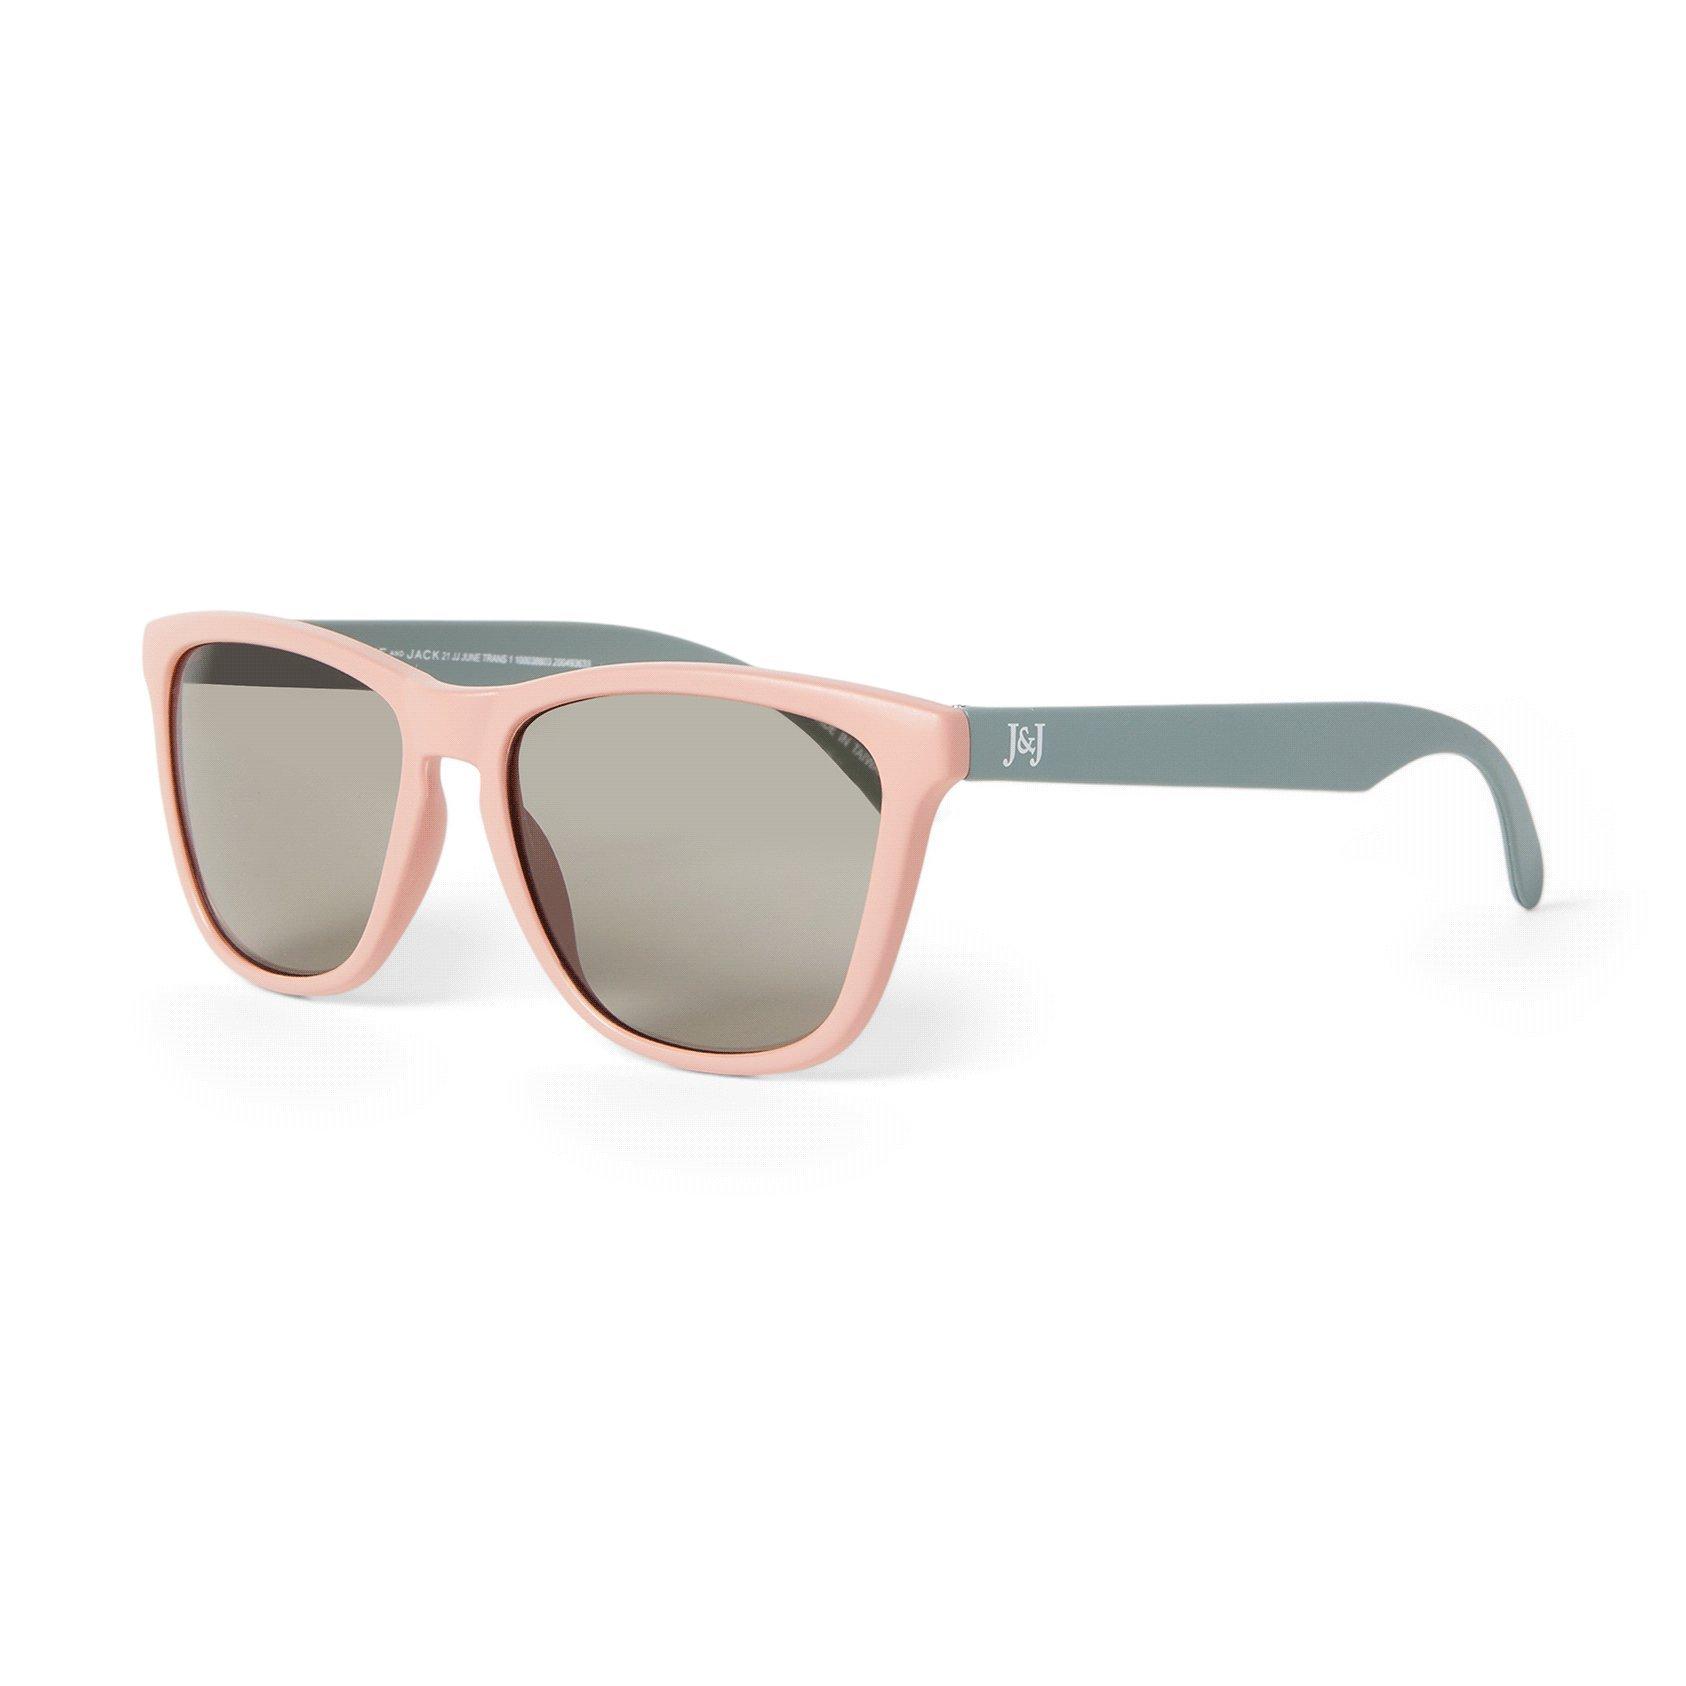 Colorblocked Sunglasses  image number 0